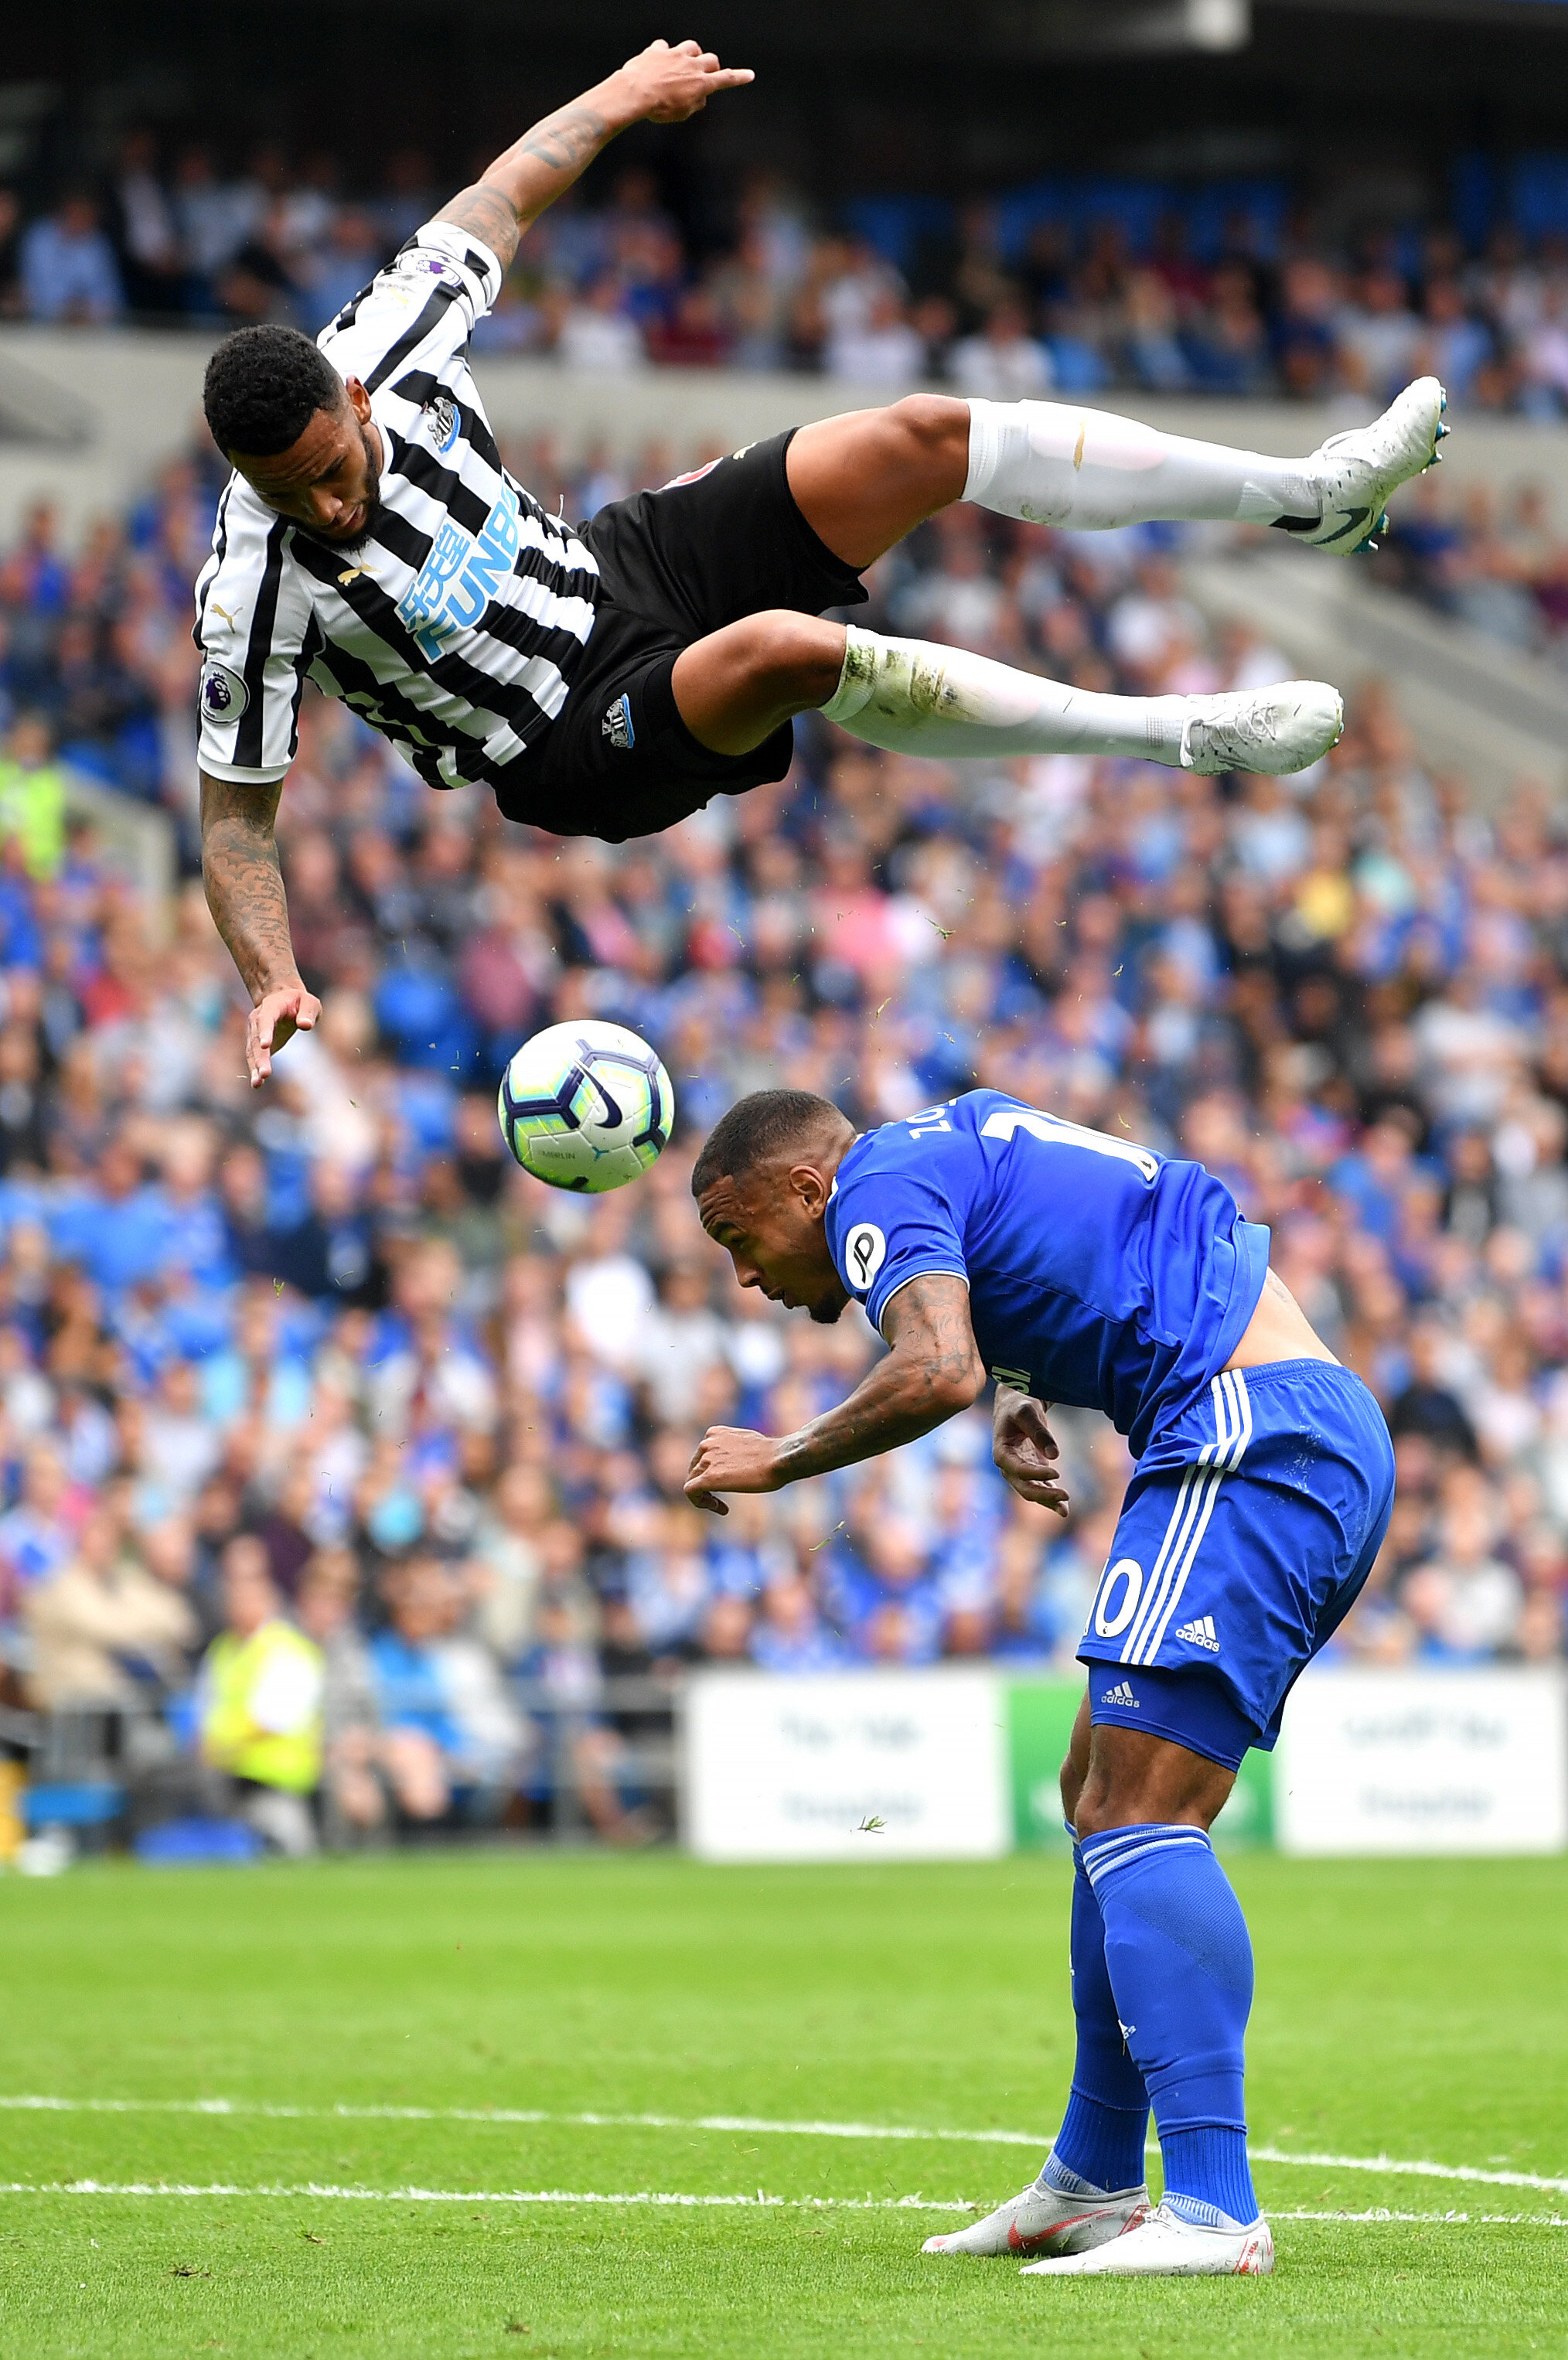  Jamaal Lascelles goes airborne over Kenneth Zohore 